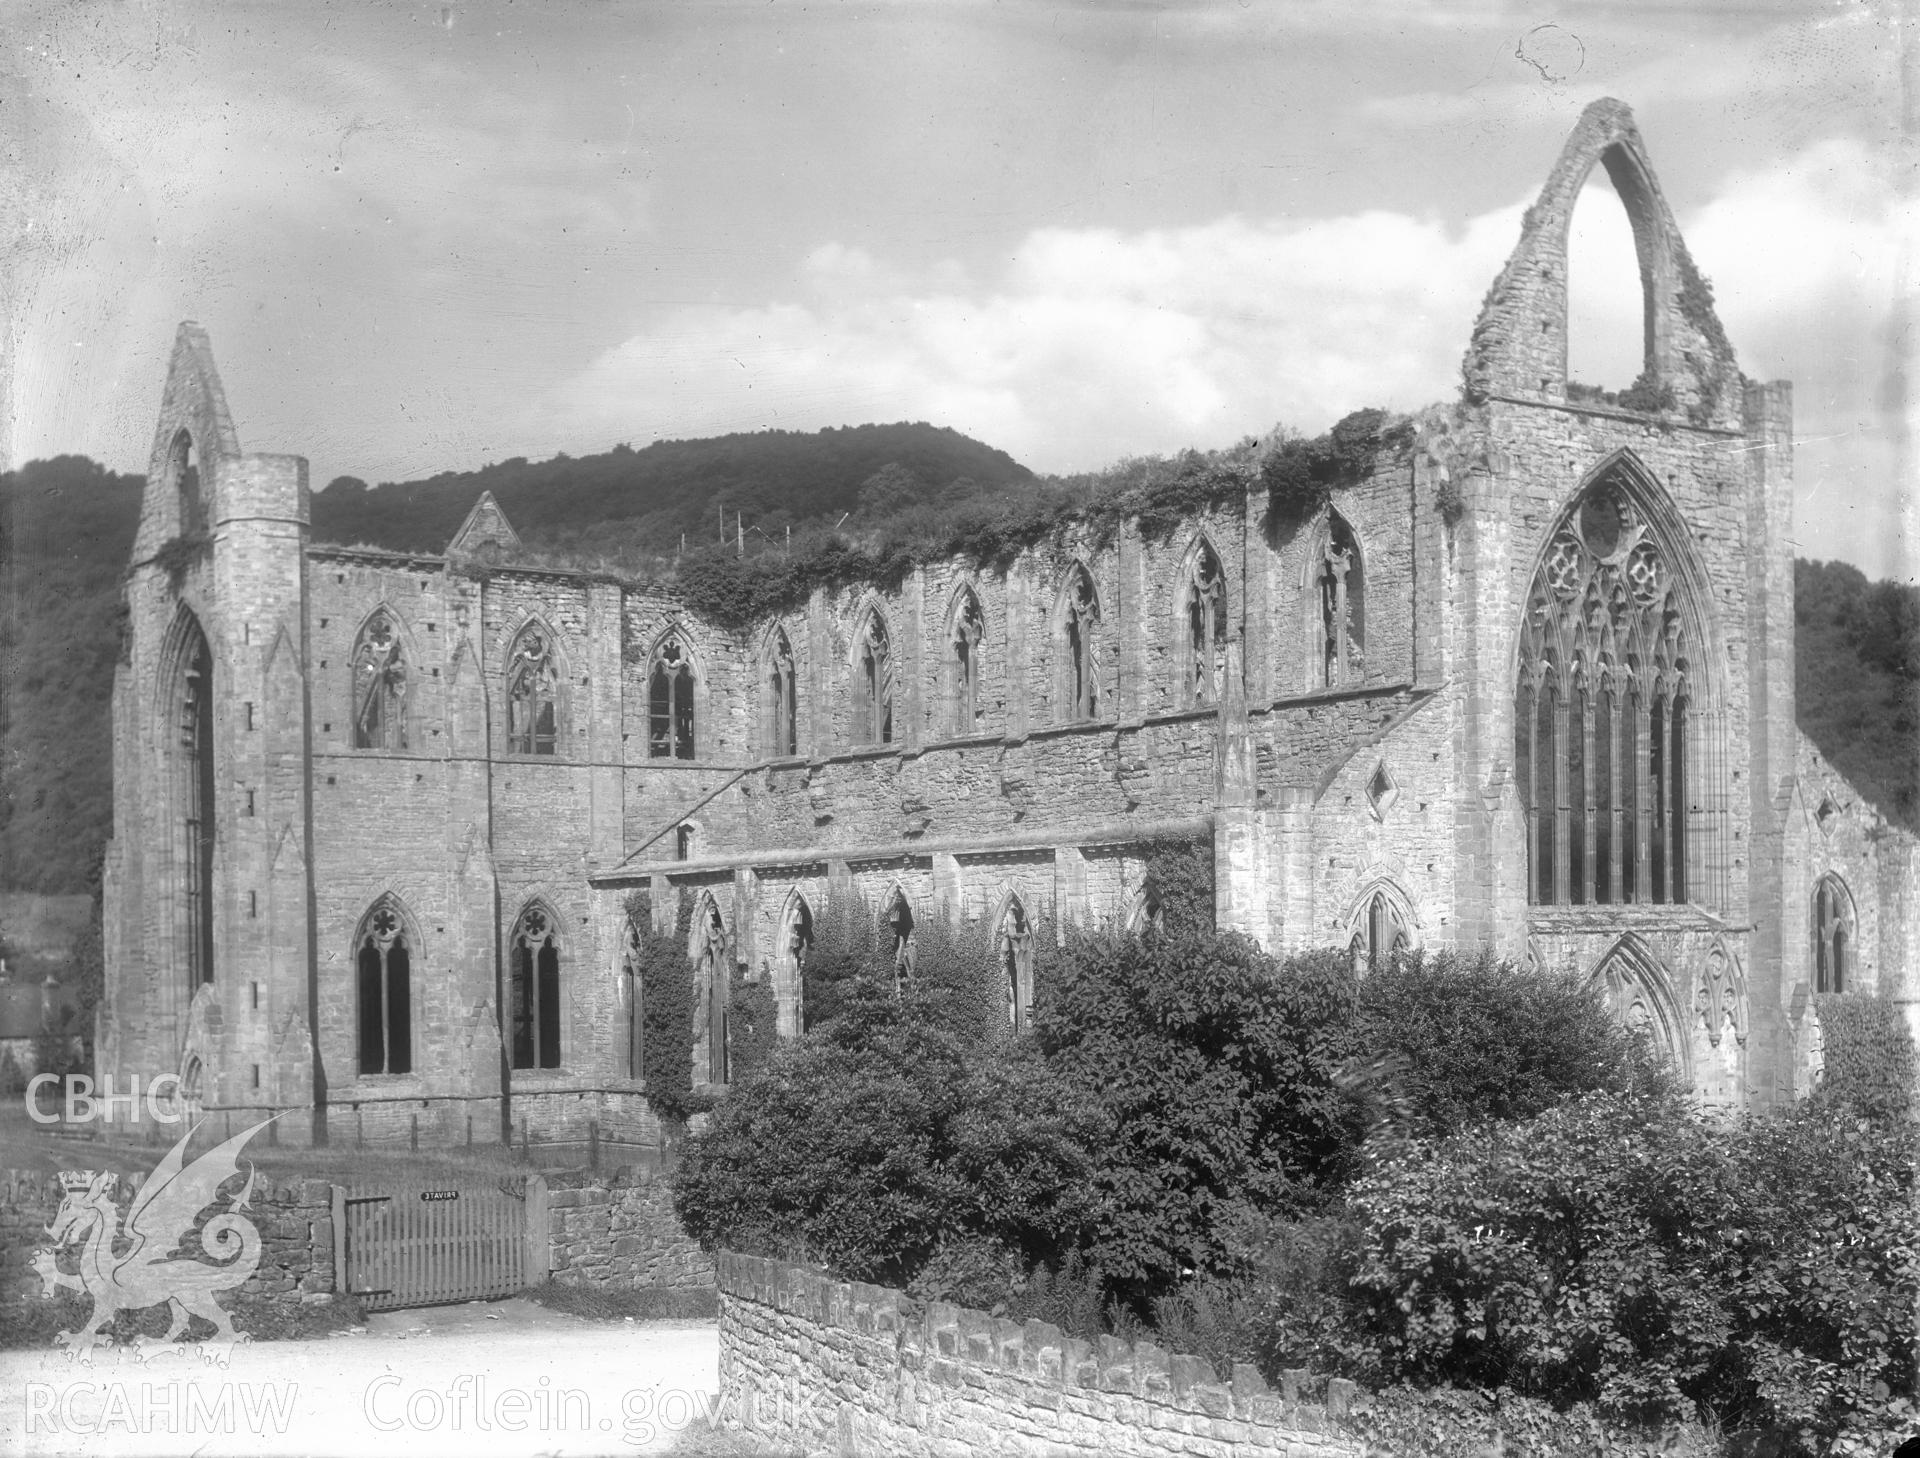 Digital copy of a glass negative showing general view of Tintern Abbey.